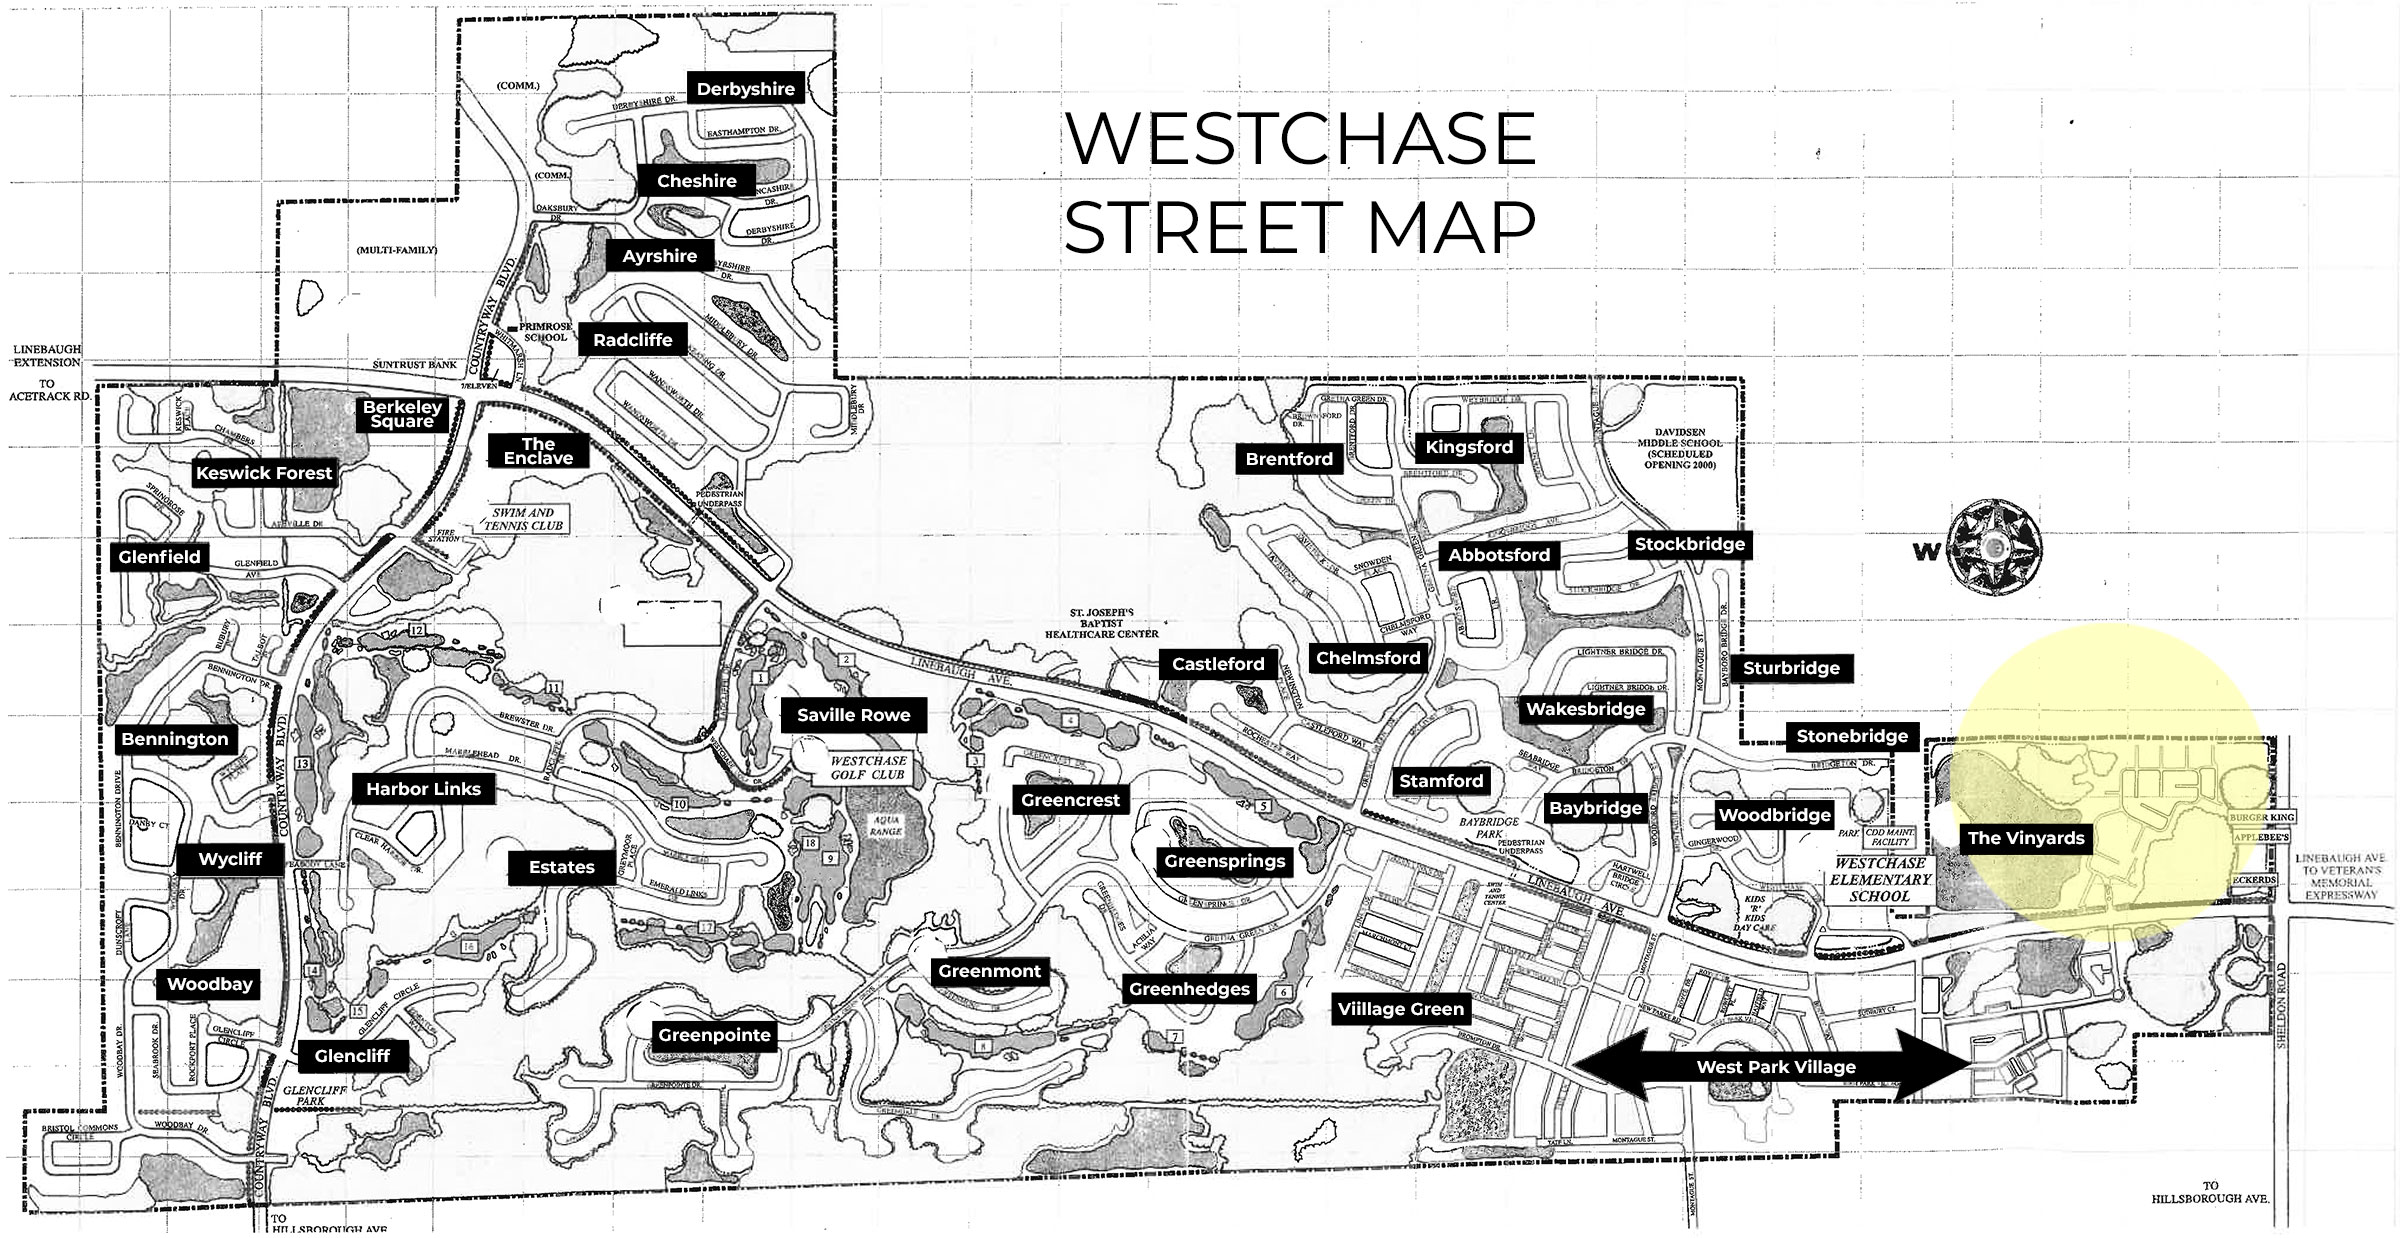 Map of The Vineyards Westchase